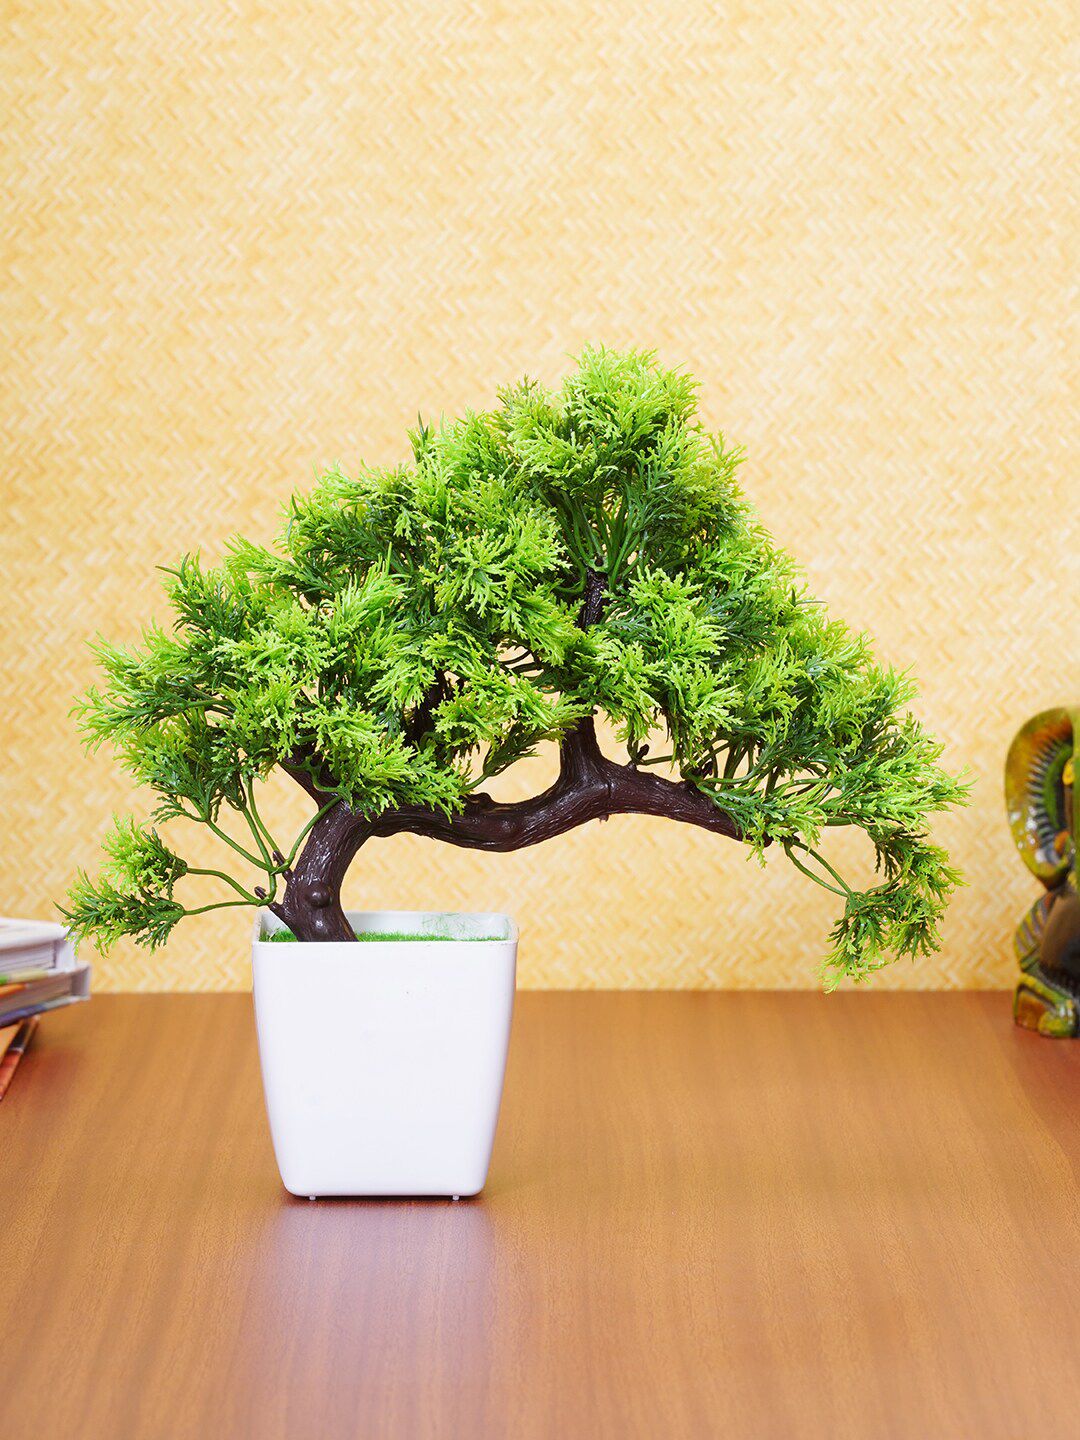 Dekorly Green & White Bonsai Artificial Plant With Pot Price in India